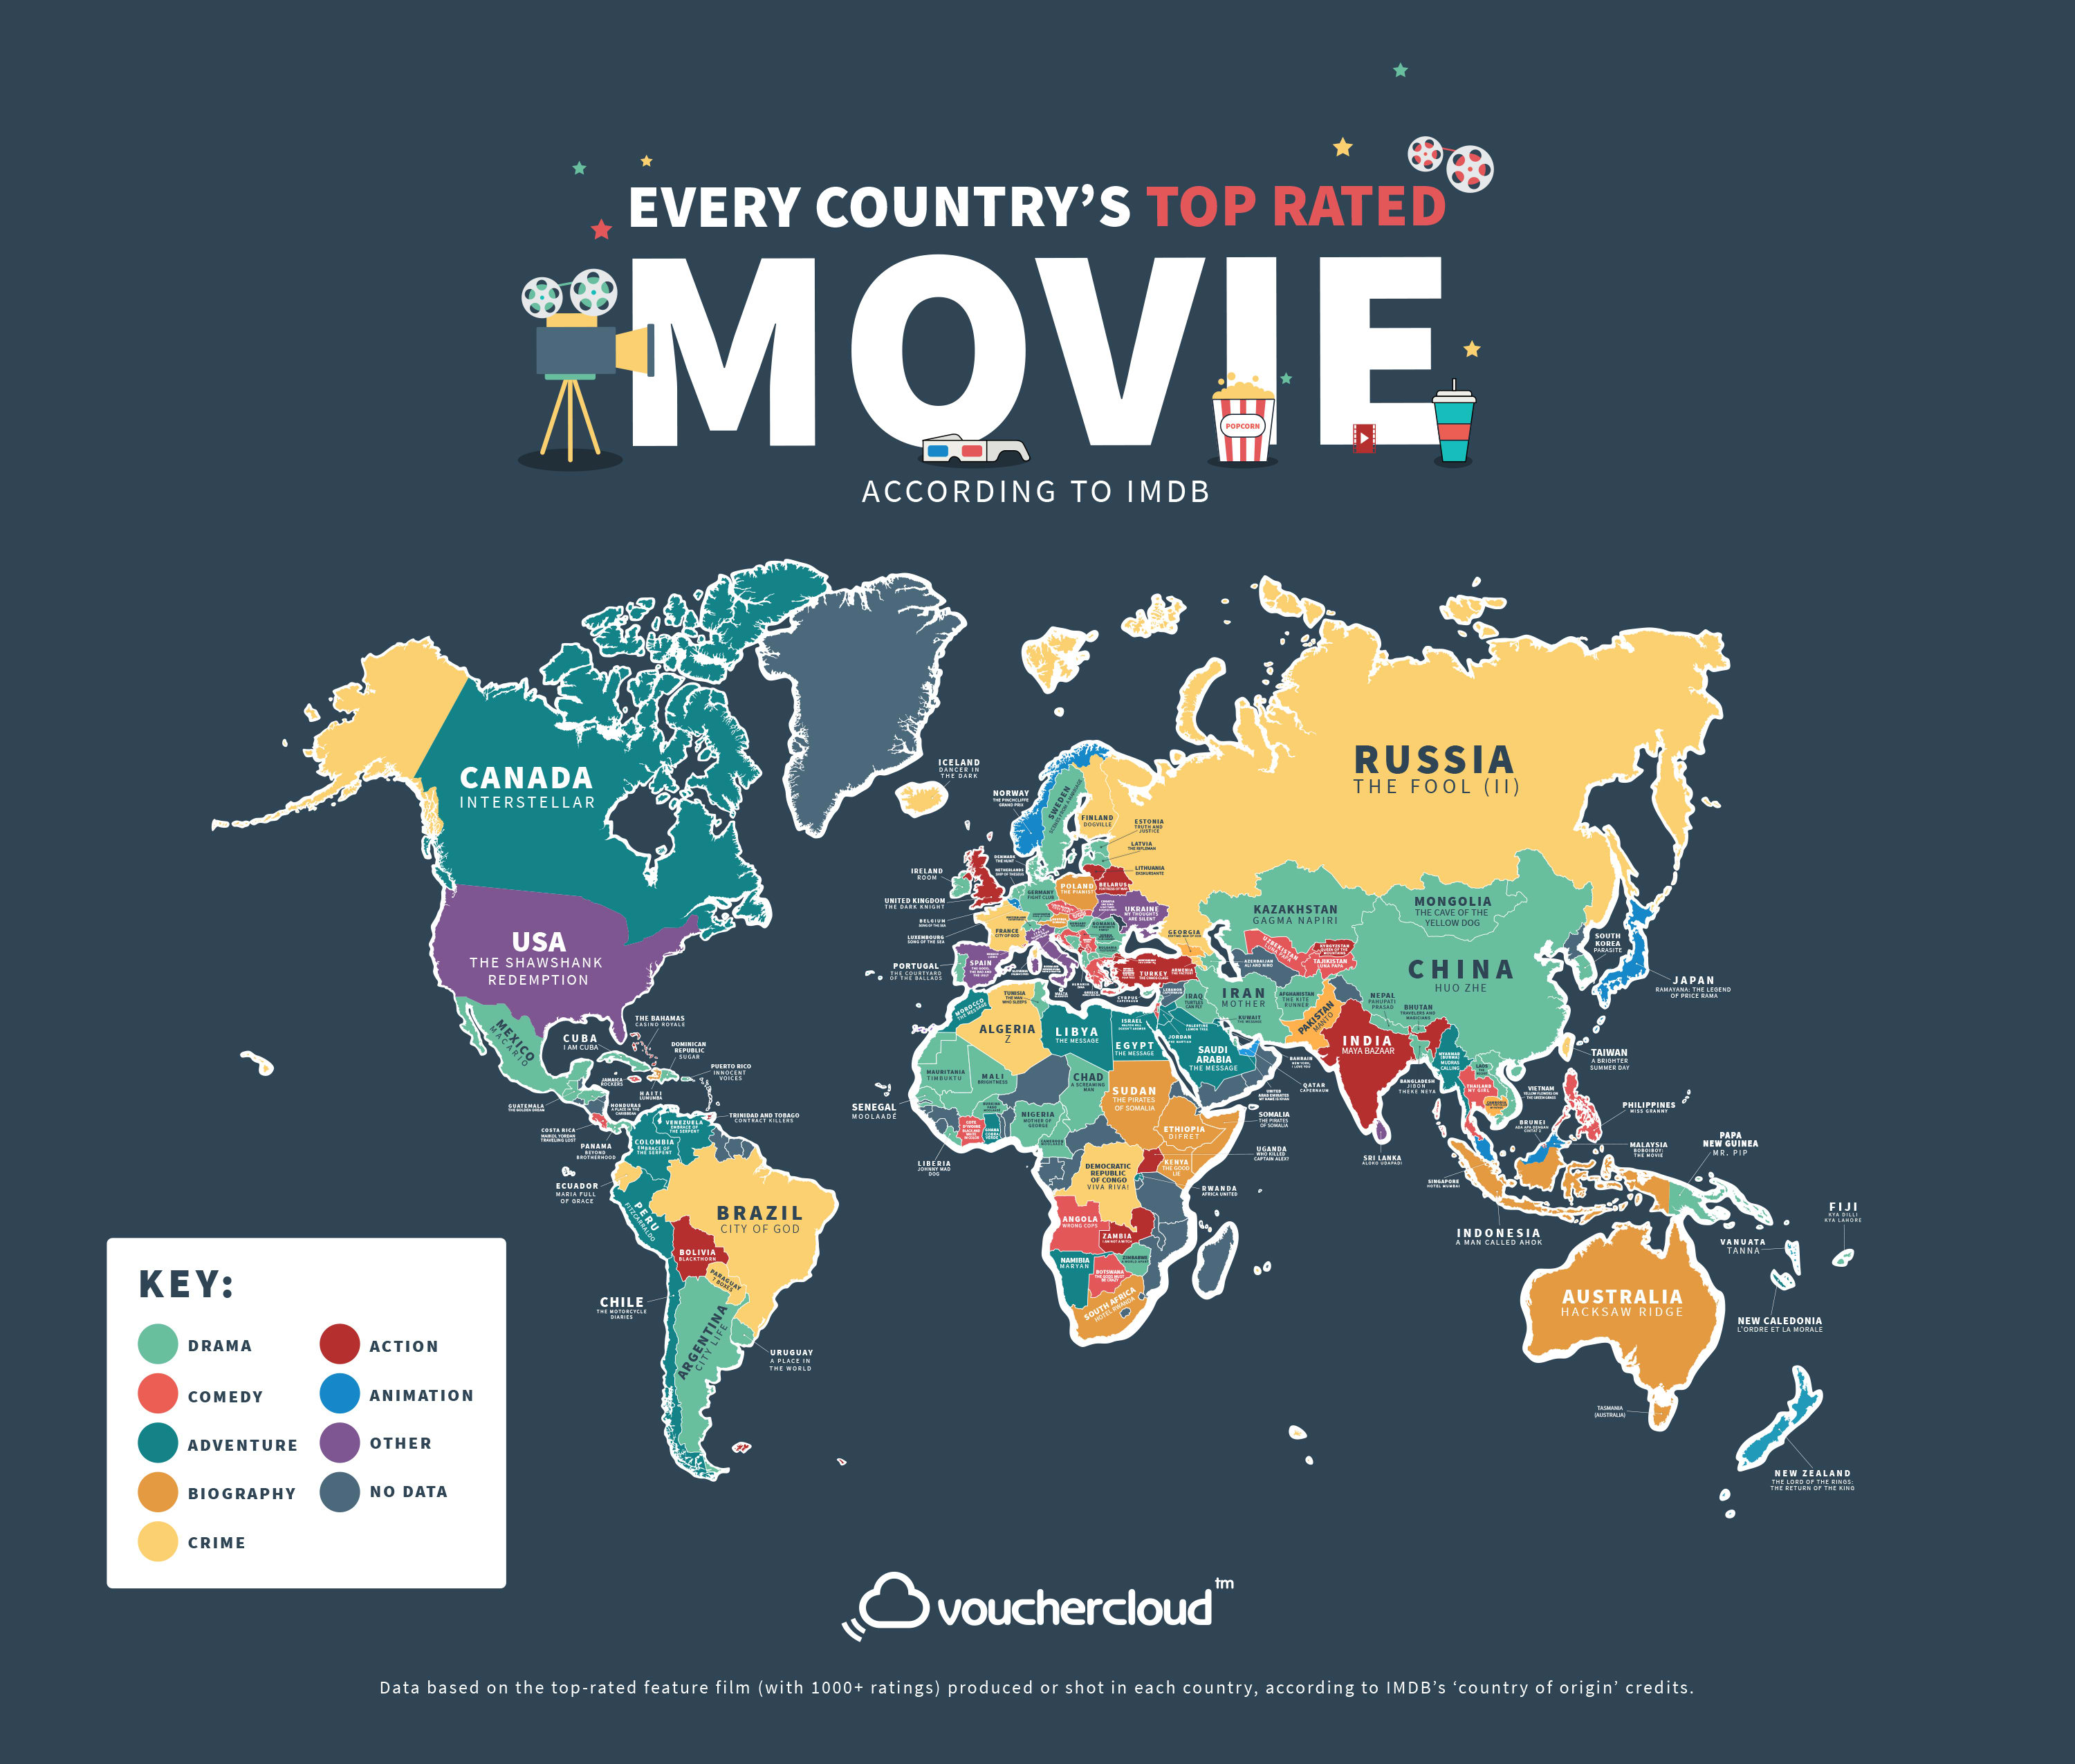 Every Country's Best Rated Movie (According to IMDB)